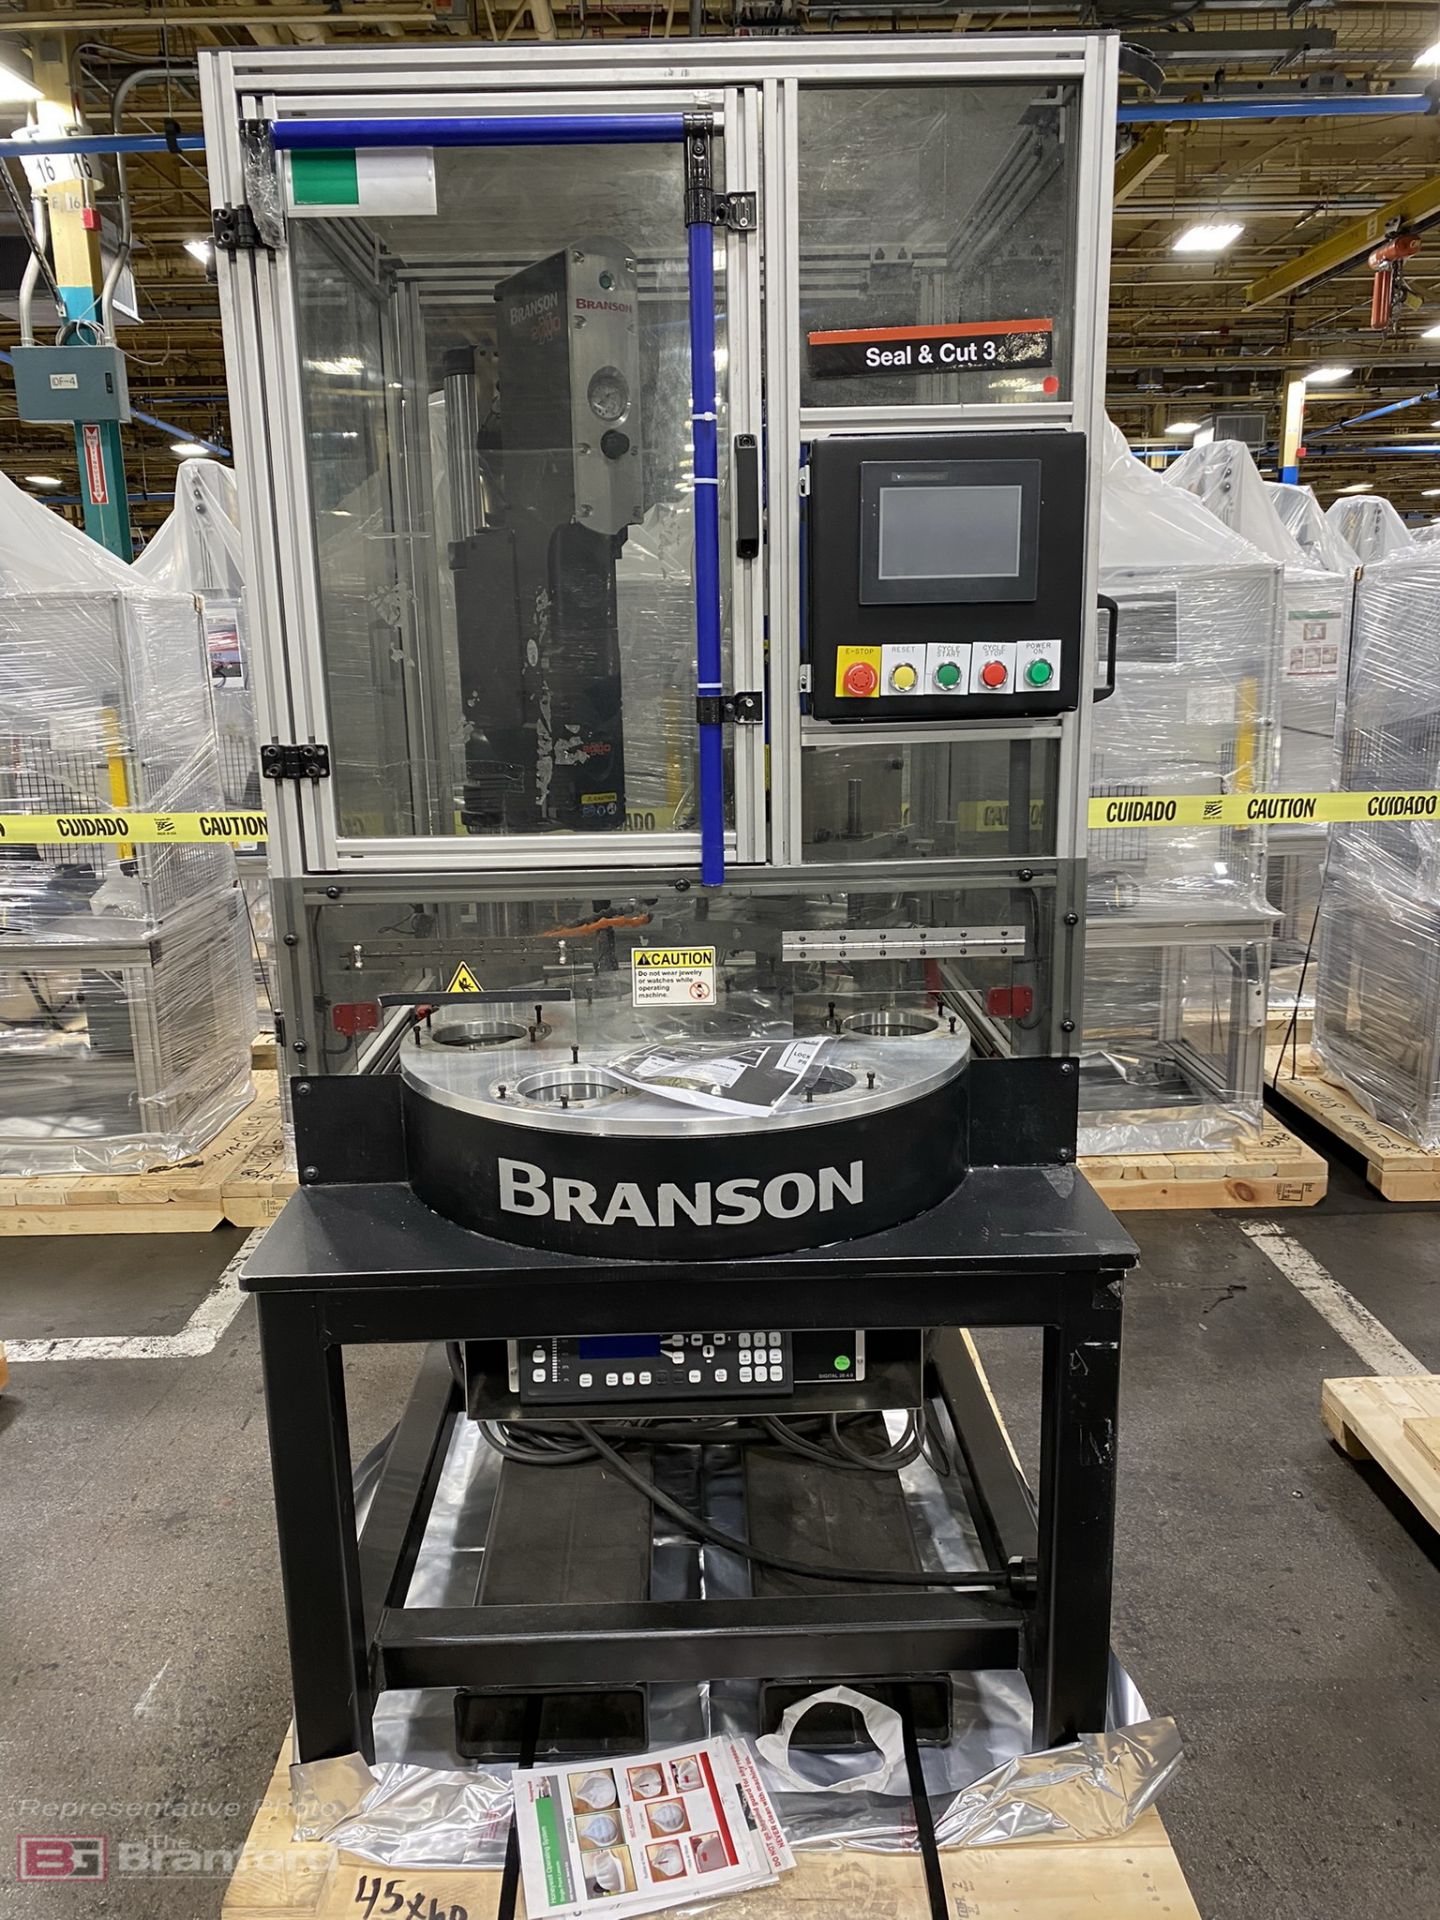 Branson 2000X Series 40 Rotary 'Seal and Cut' Ultrasonic Plastic Welding Assembly System (2020) - Image 6 of 11